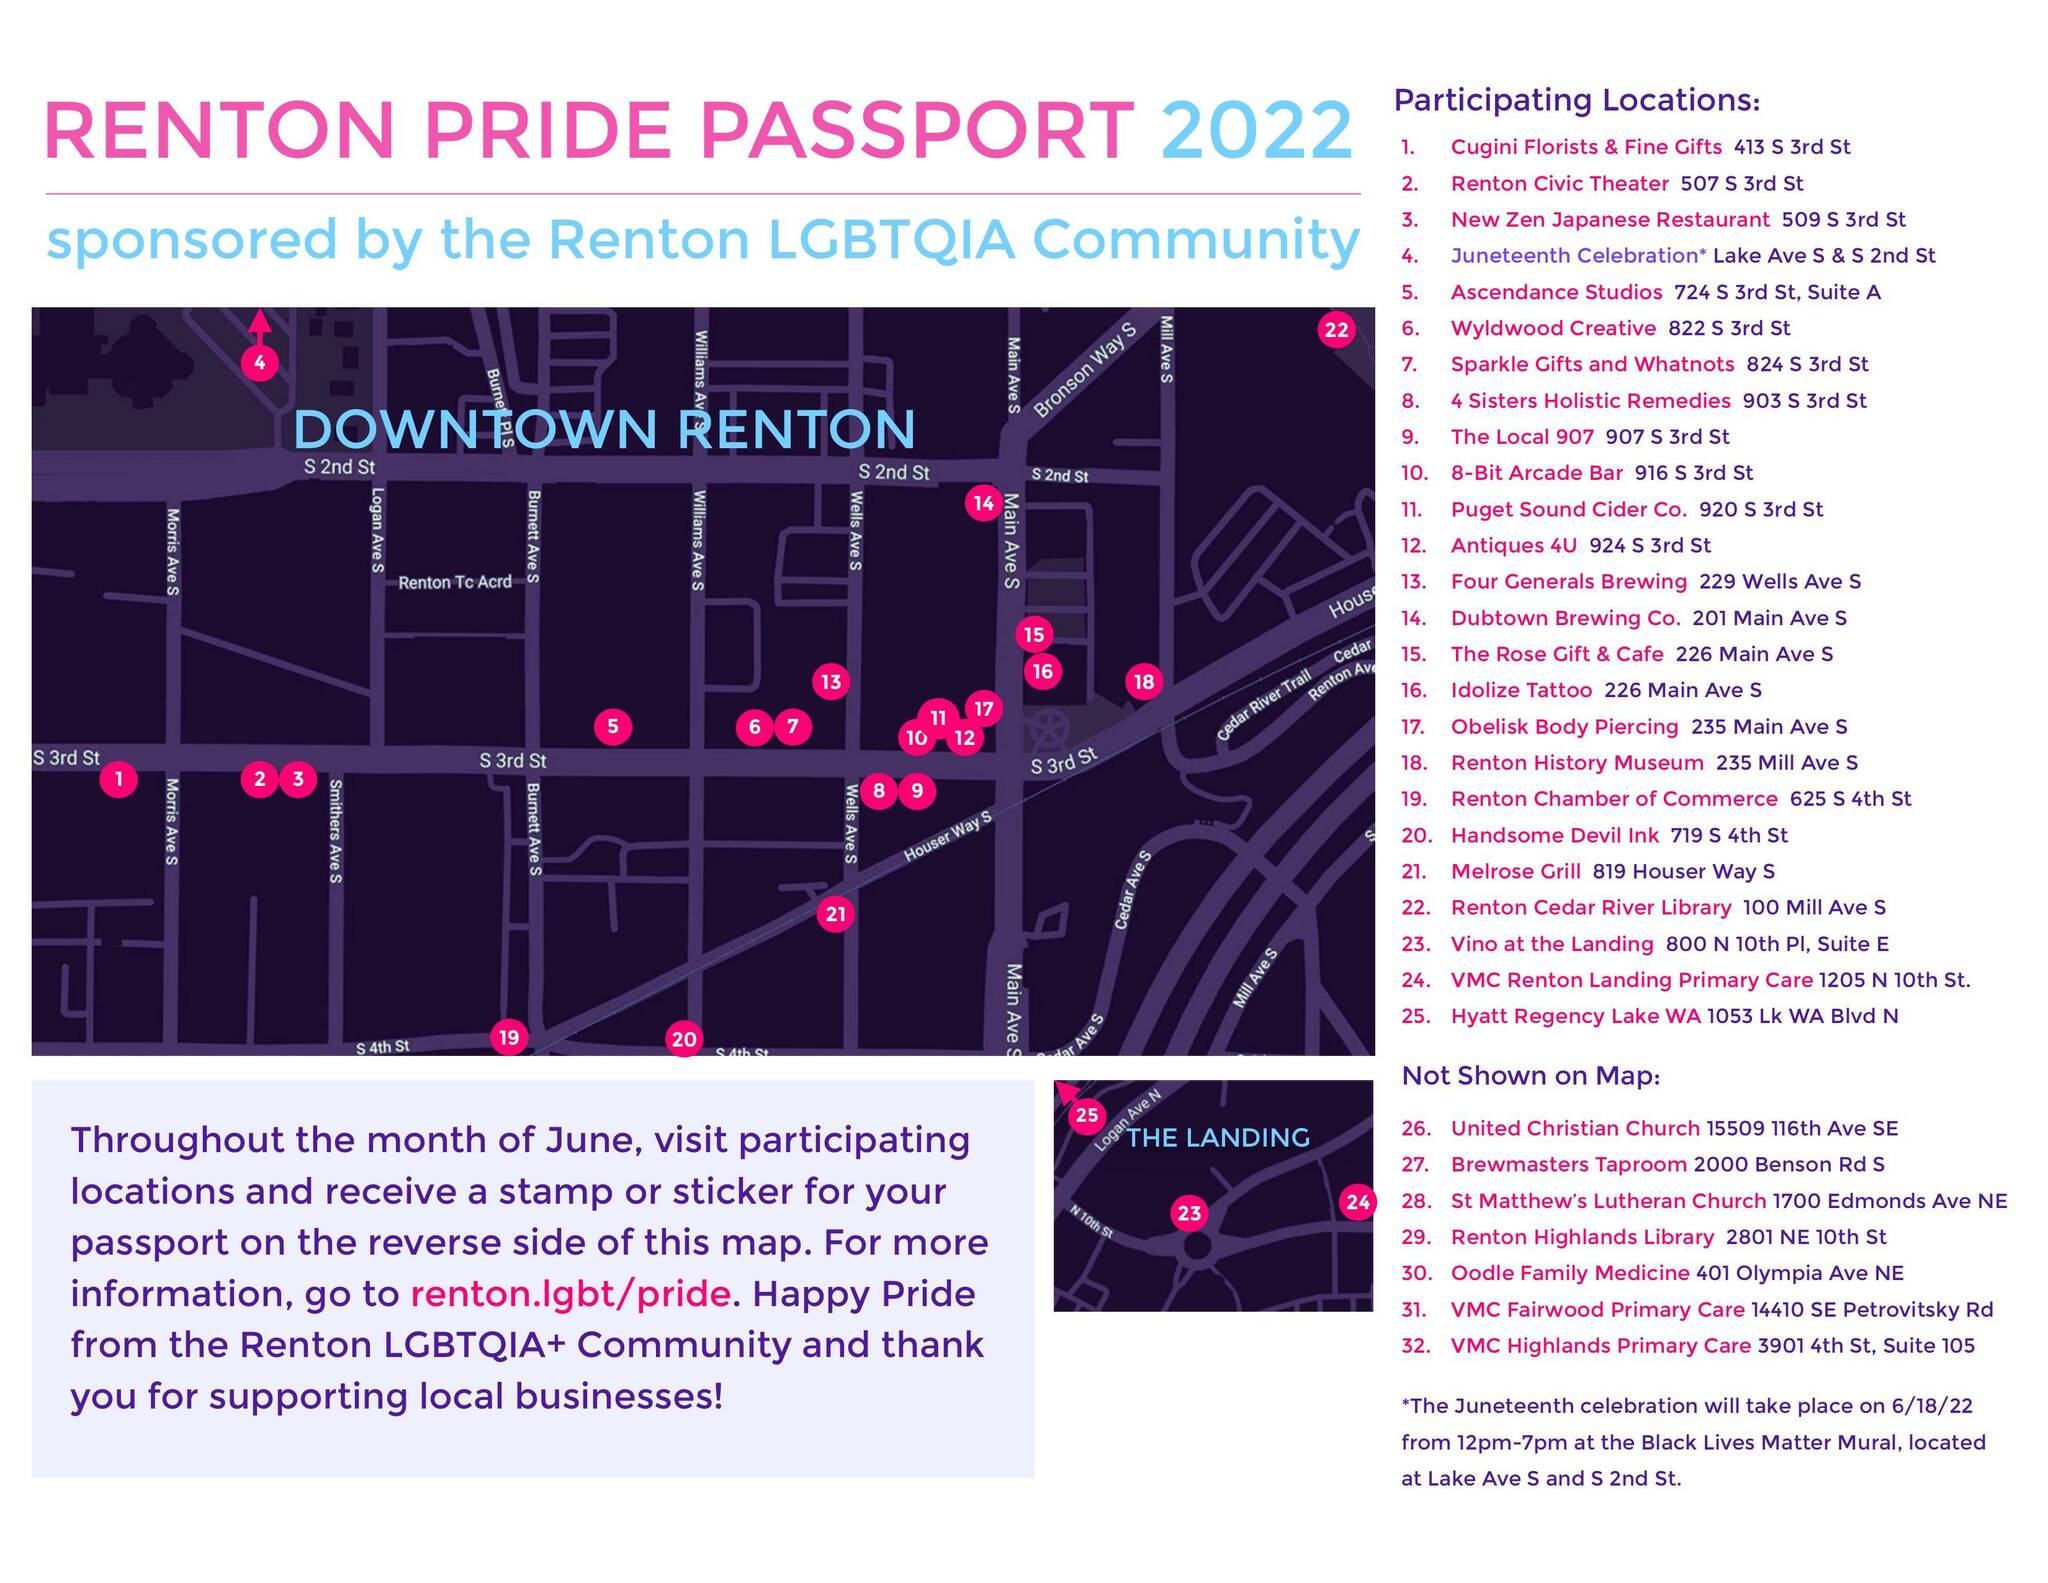 The Renton Pride Passport includes a map of all participating locations. Photo courtesy of Renton LGBTQIA+ Community.